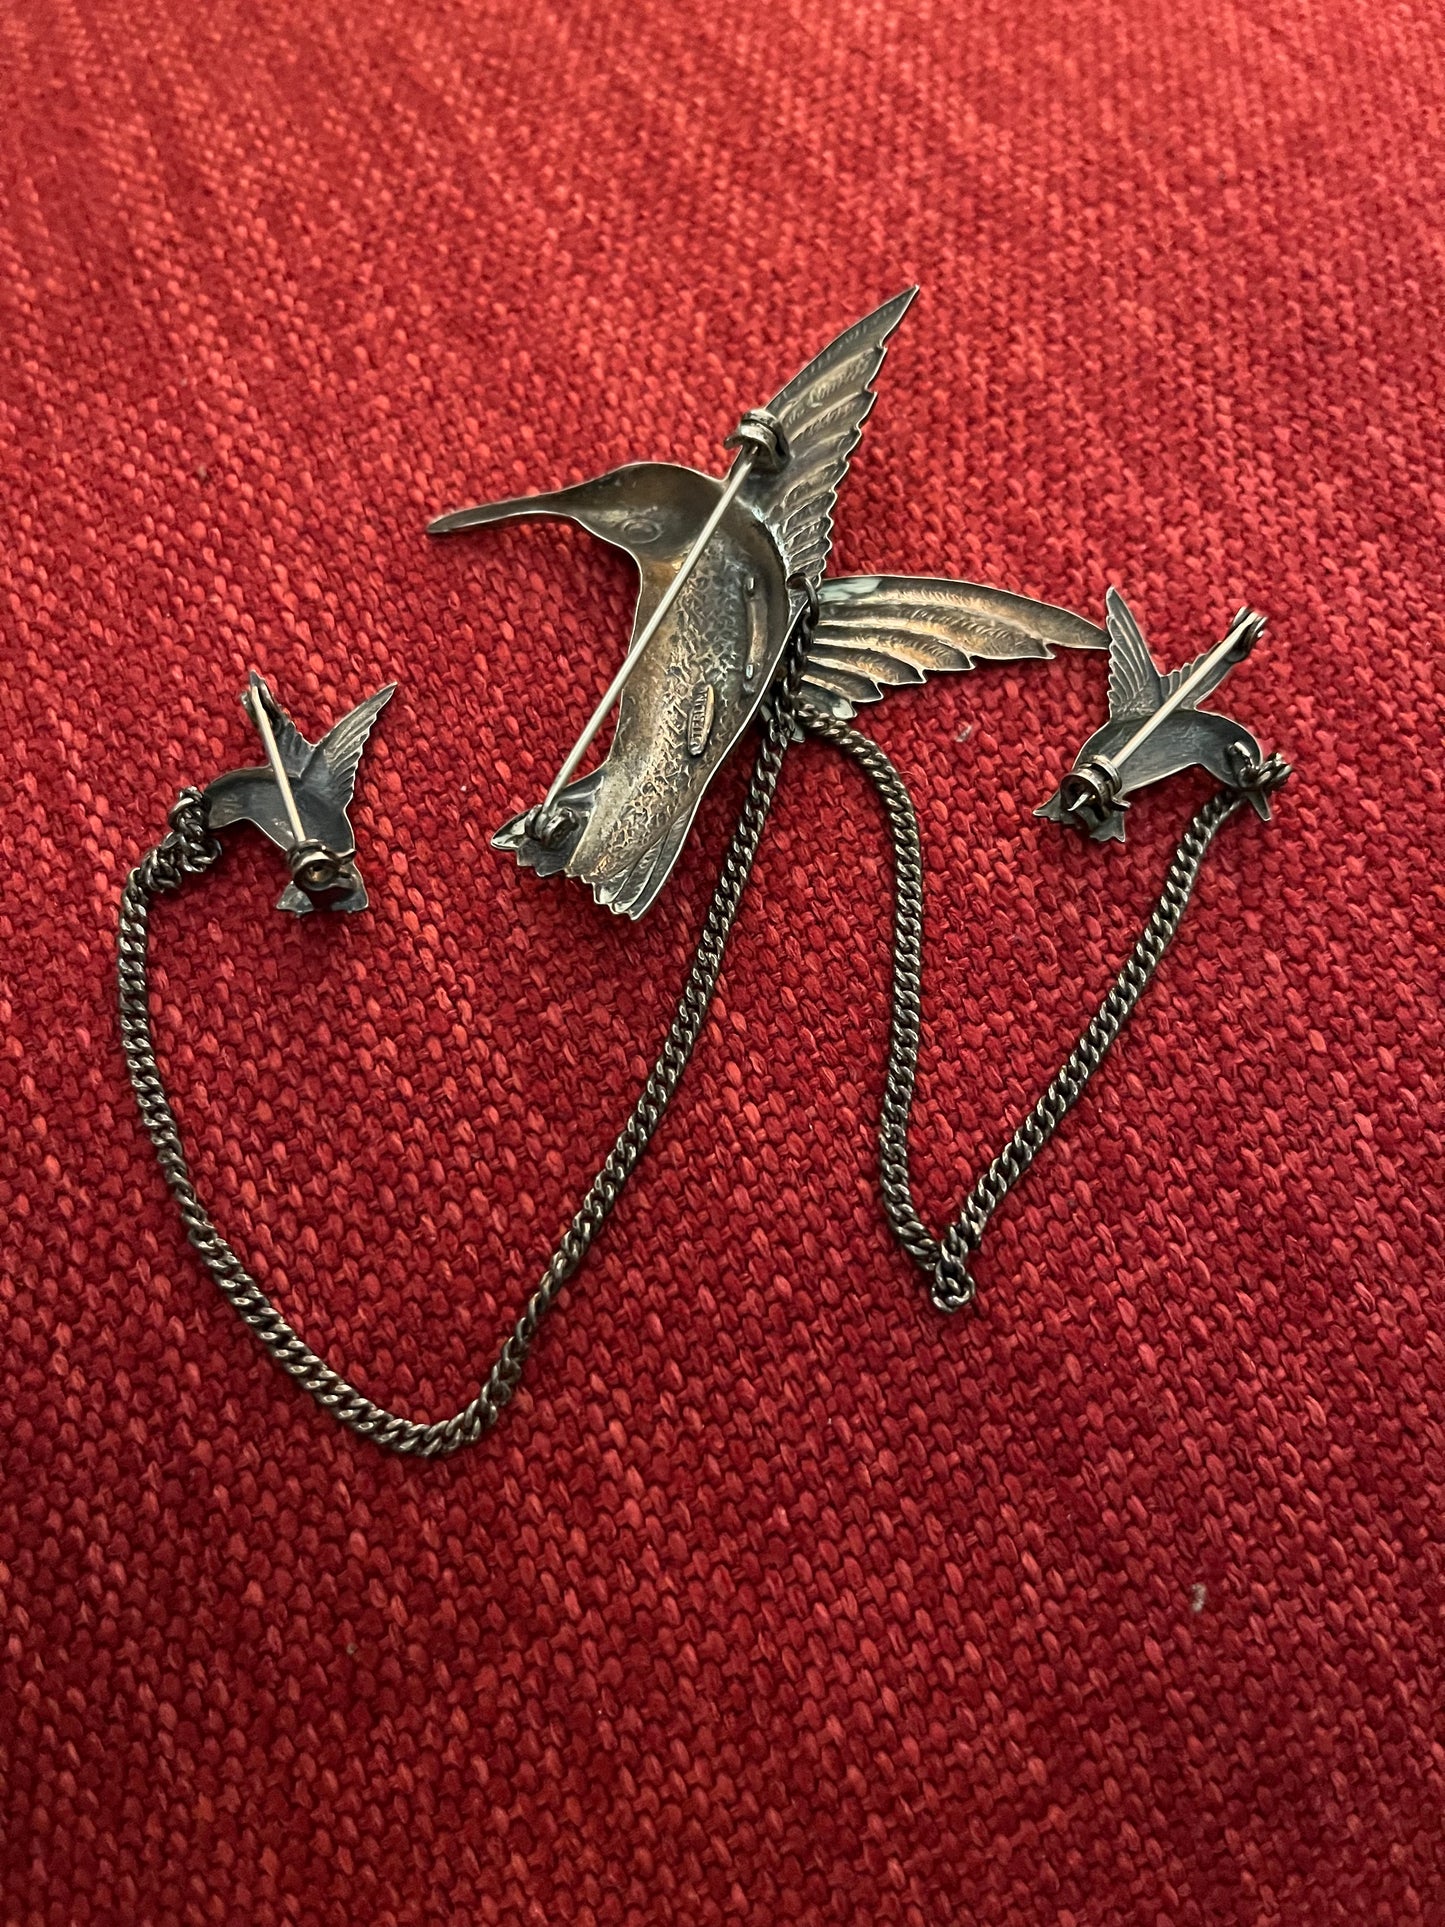 Vintage Sterling Silver Hummingbird Chatelaine Brooch with Connecting Chain and Small Hummingbird Pins